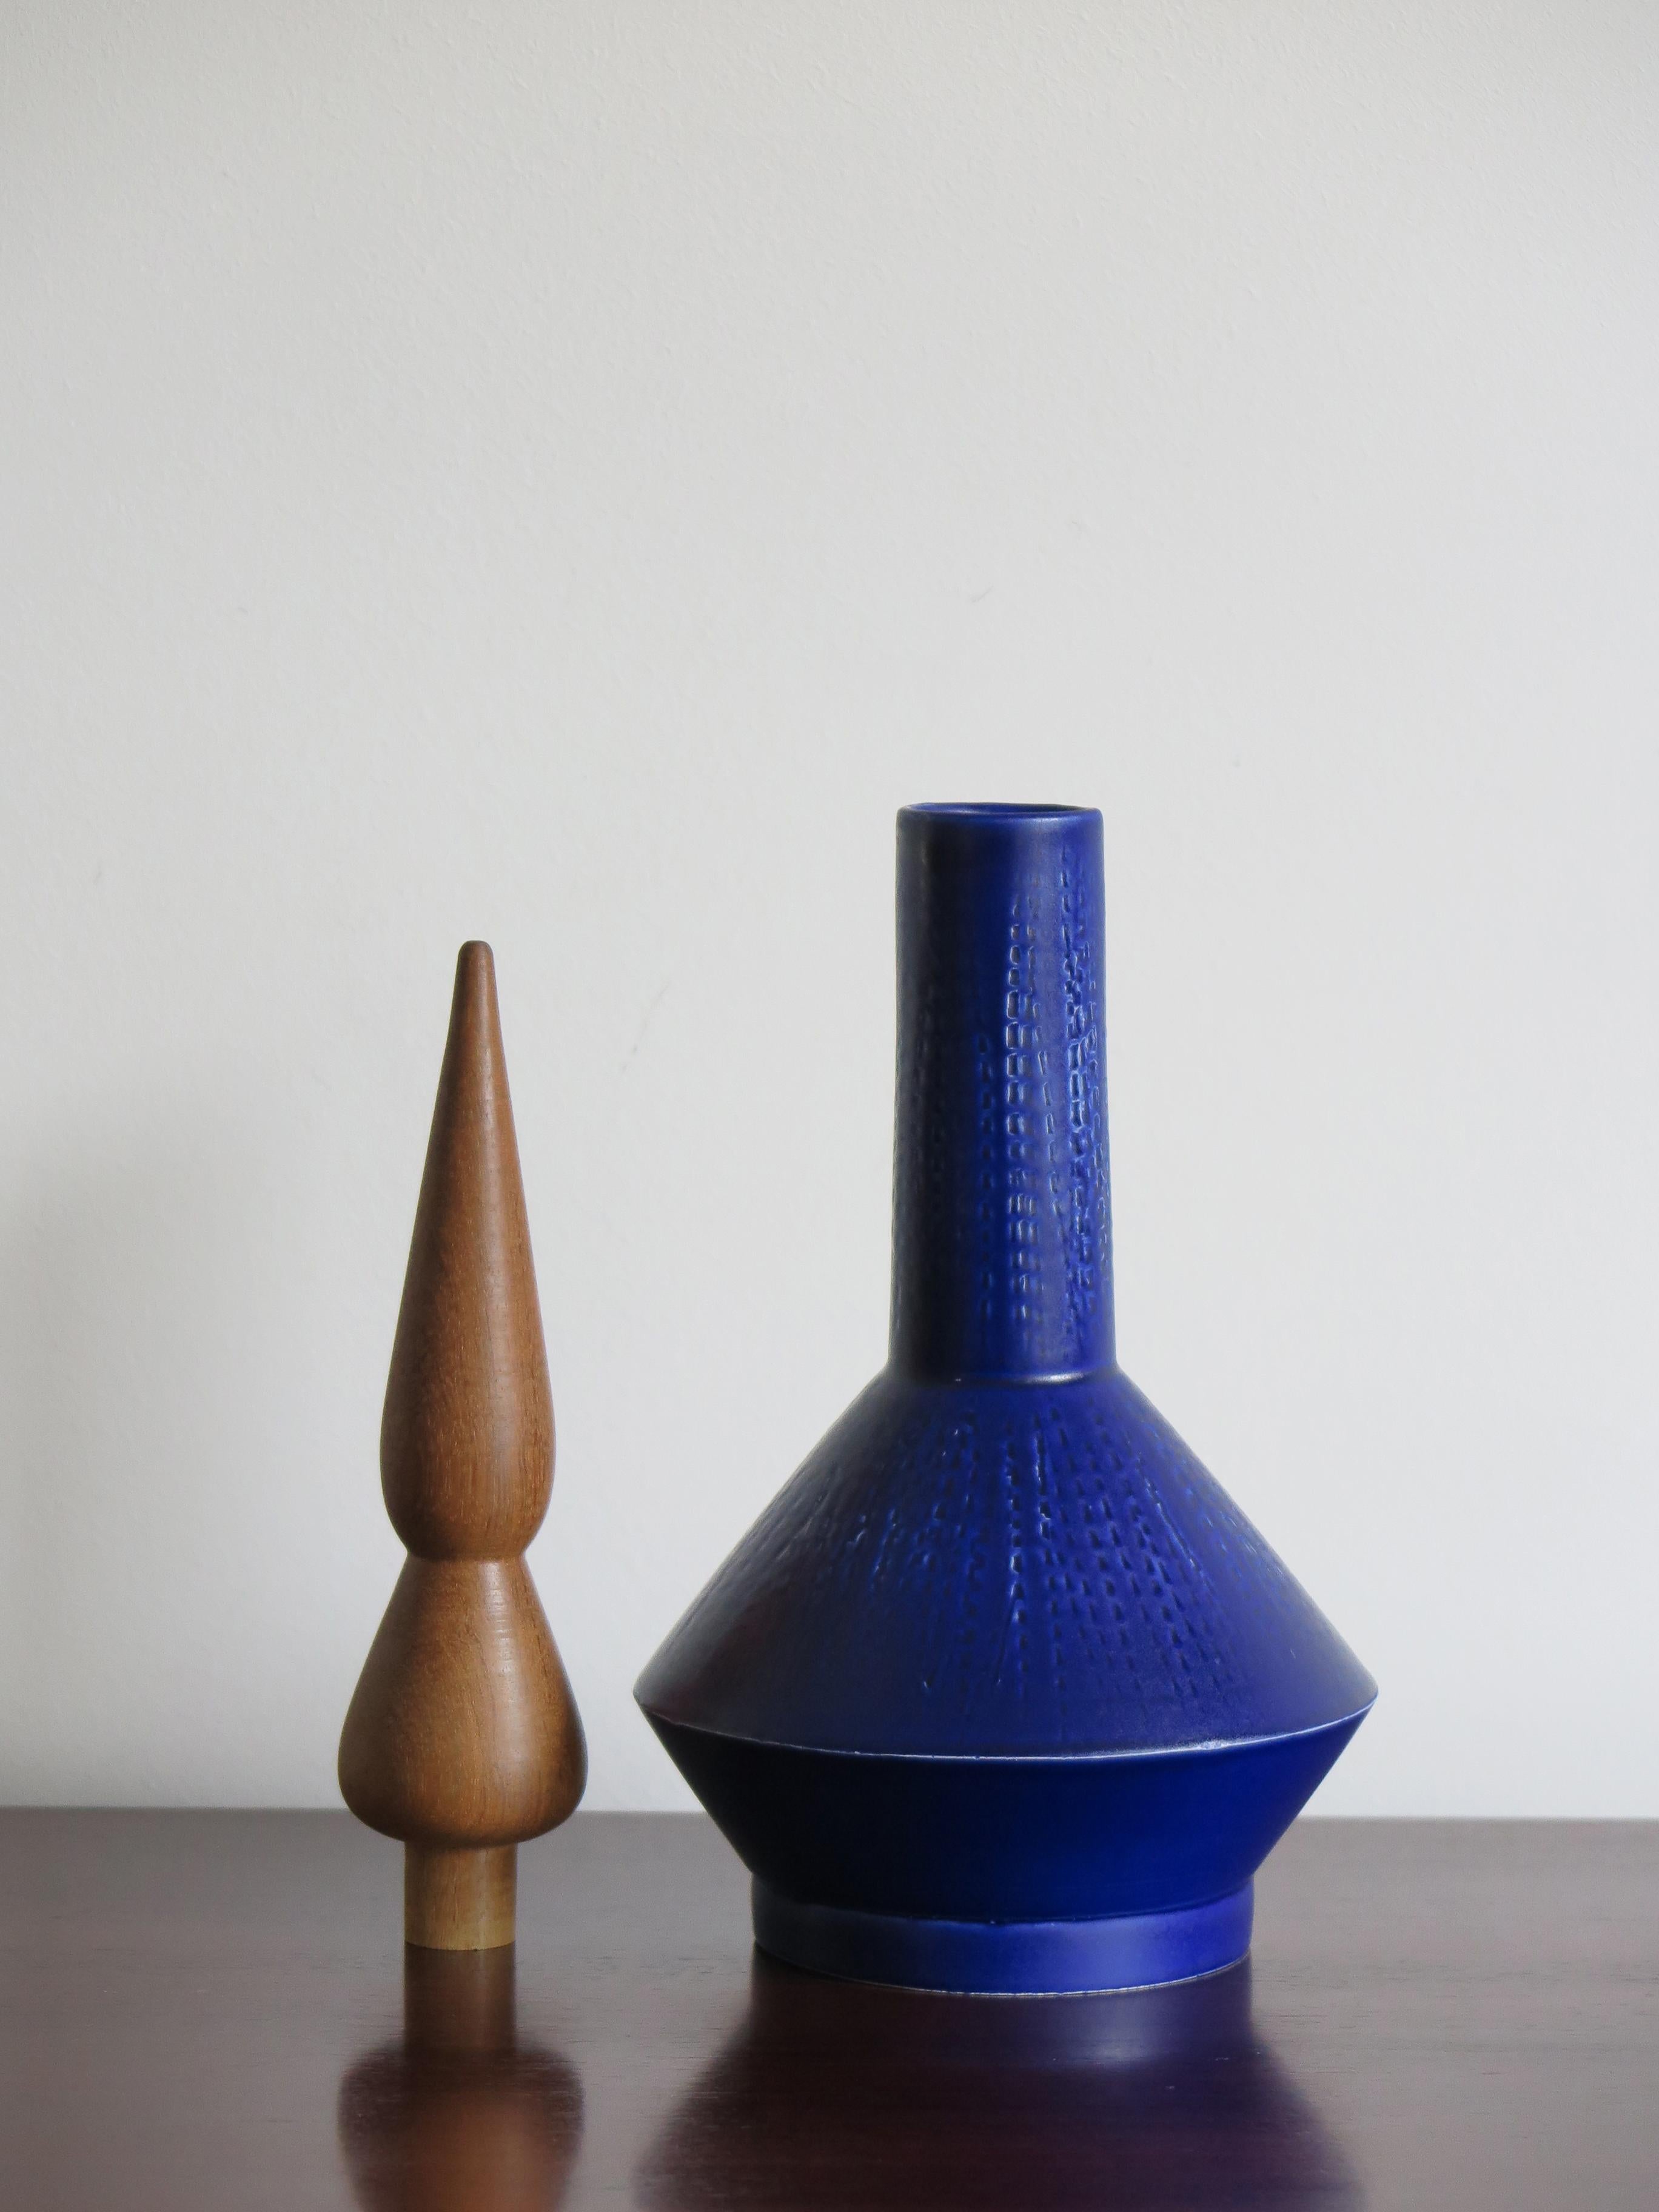 Italian Contemporary Blue Green Ceramic Vases Designed by Capperidicasa, Made in Italy